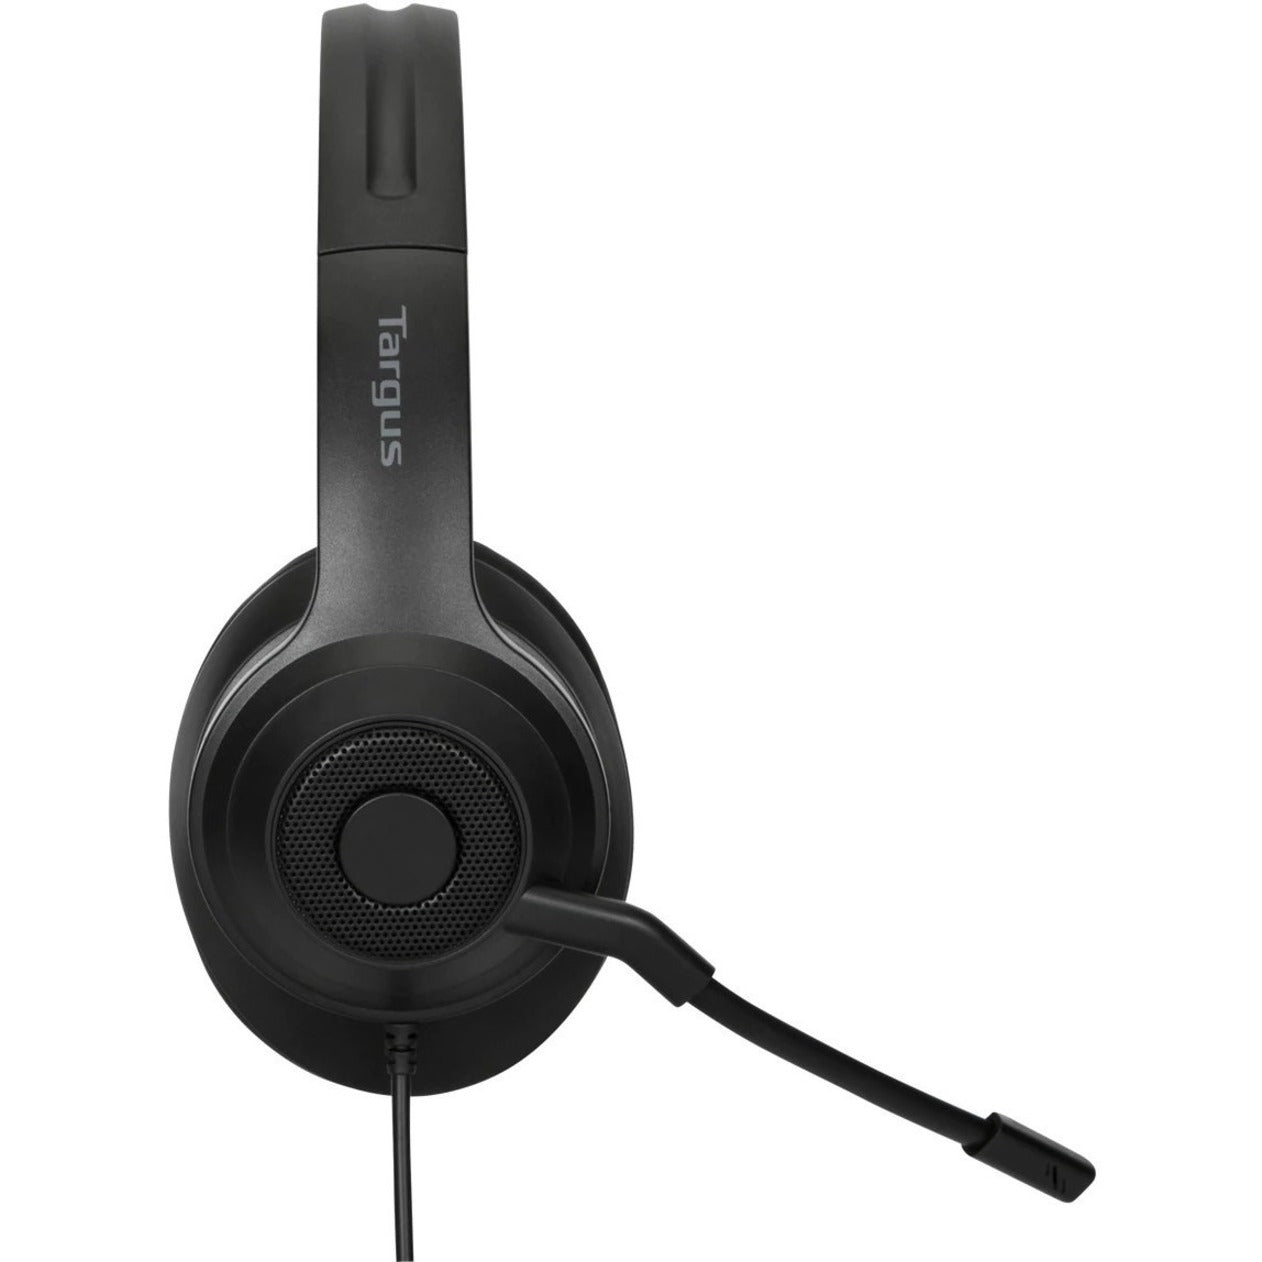 Targus AEH102TT Wired Stereo Headset, Binaural Over-the-ear, USB-A Connection, 2 Year Warranty